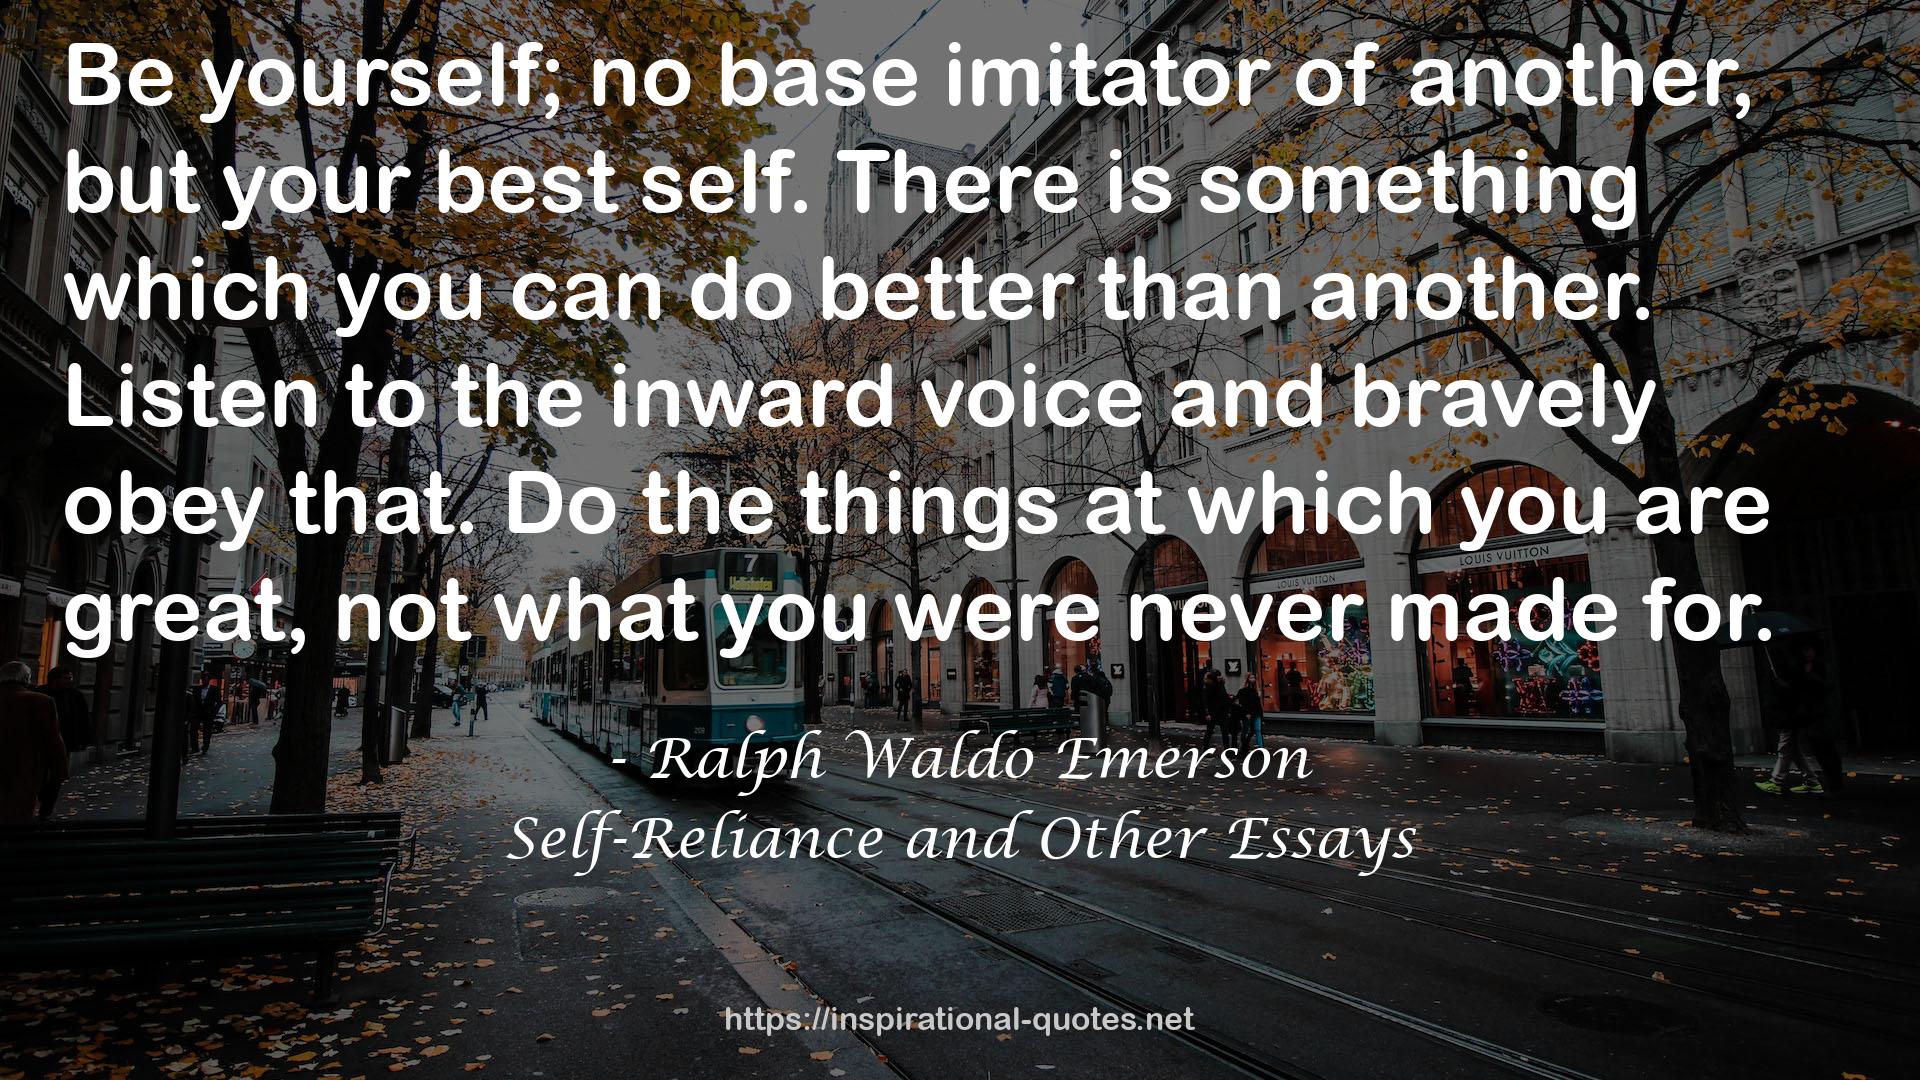 Self-Reliance and Other Essays QUOTES